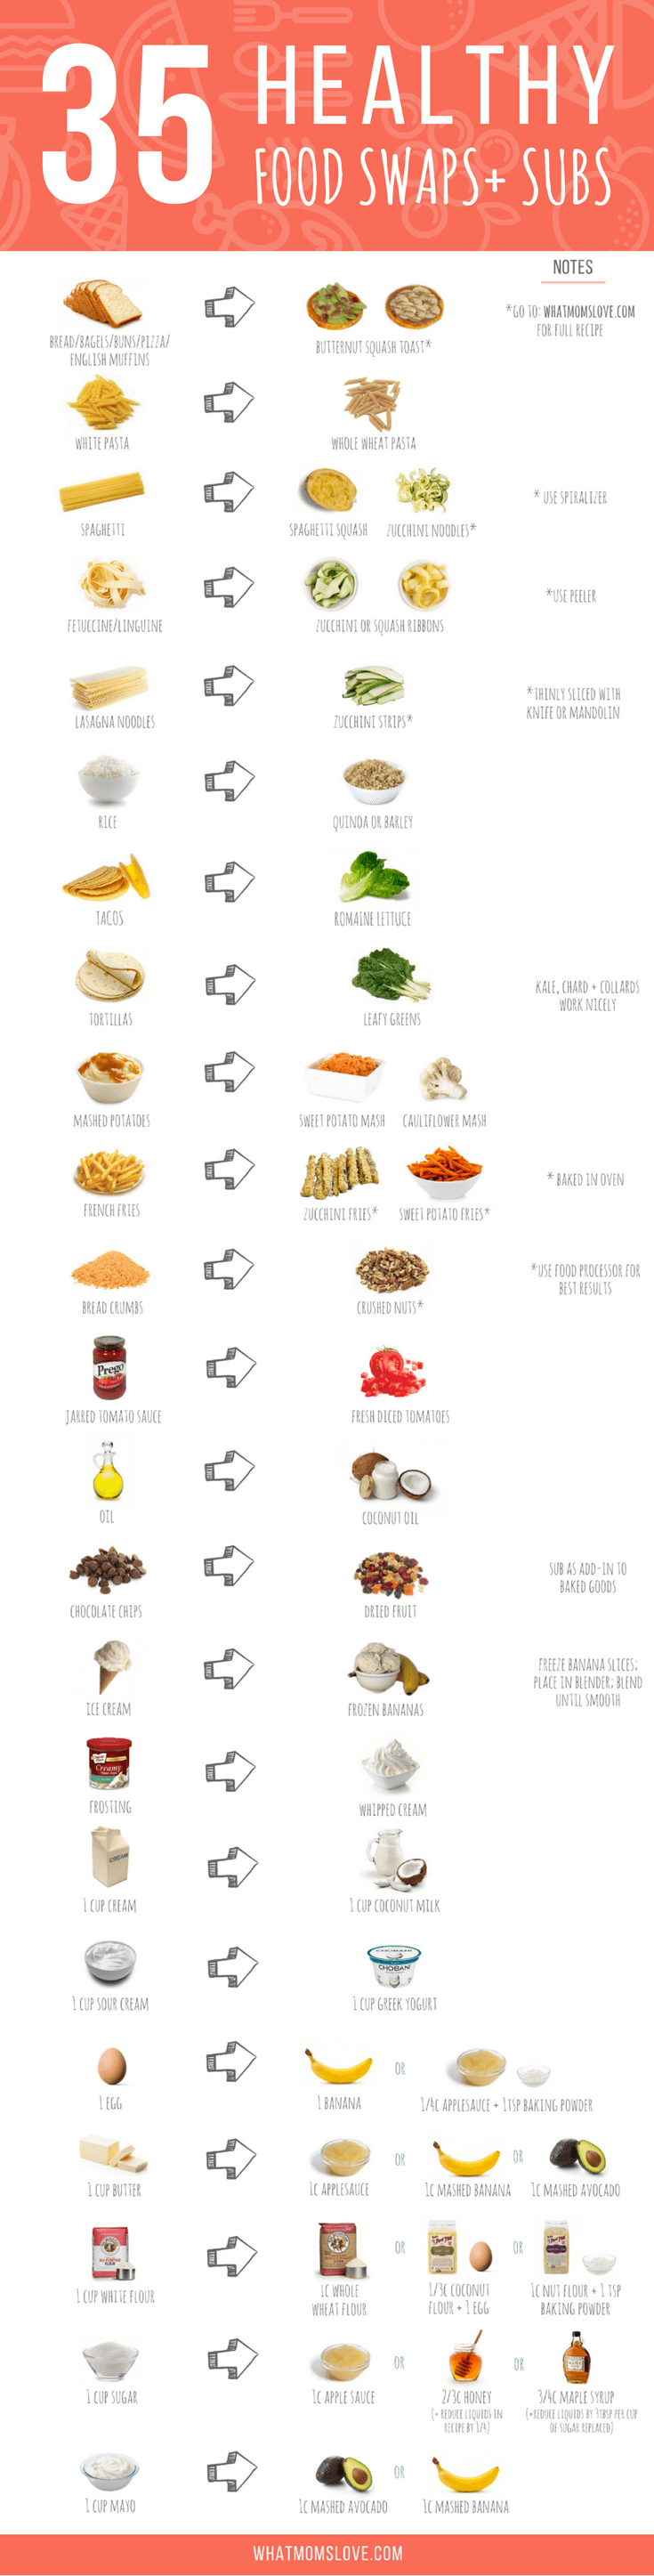 25 Food Substitutions That Will Save You Money